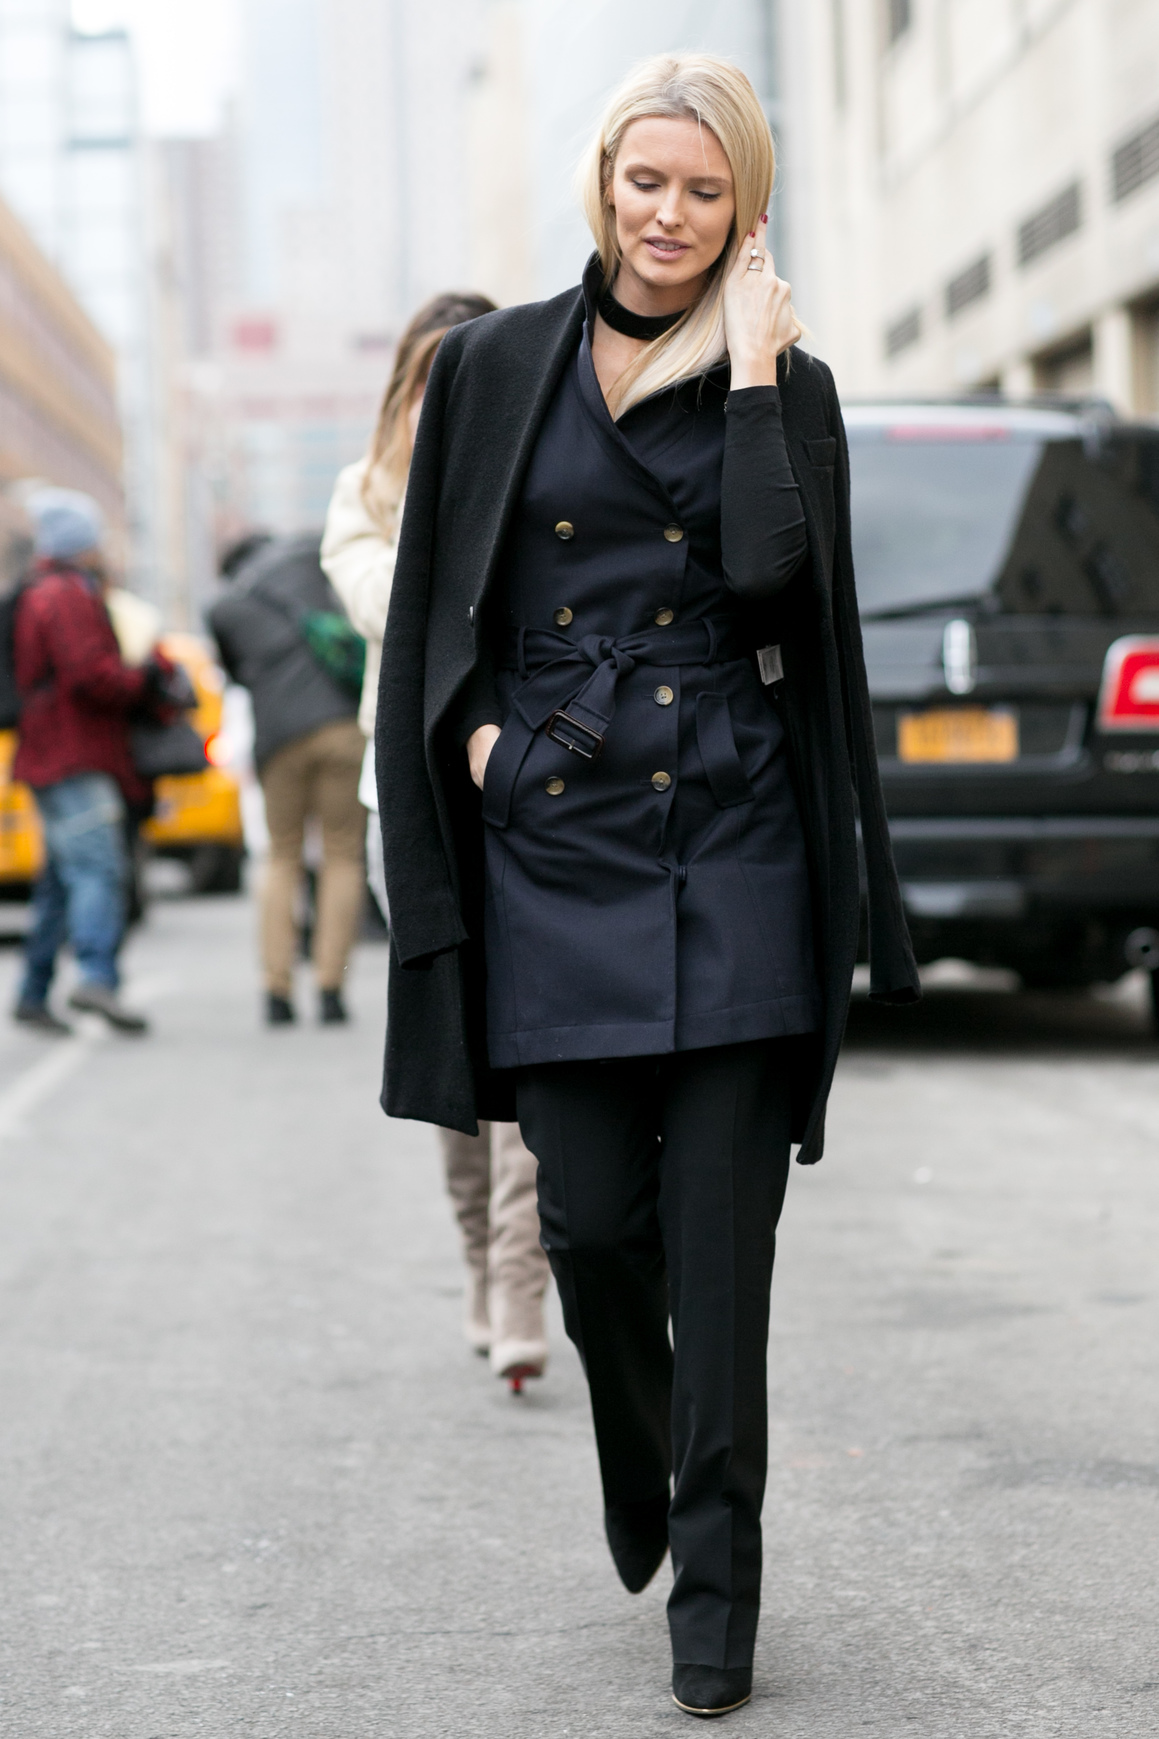 Make Work Wear More Appealing in the Winter - Navy Trench Coat with Over Coat // Notjessfashion.com